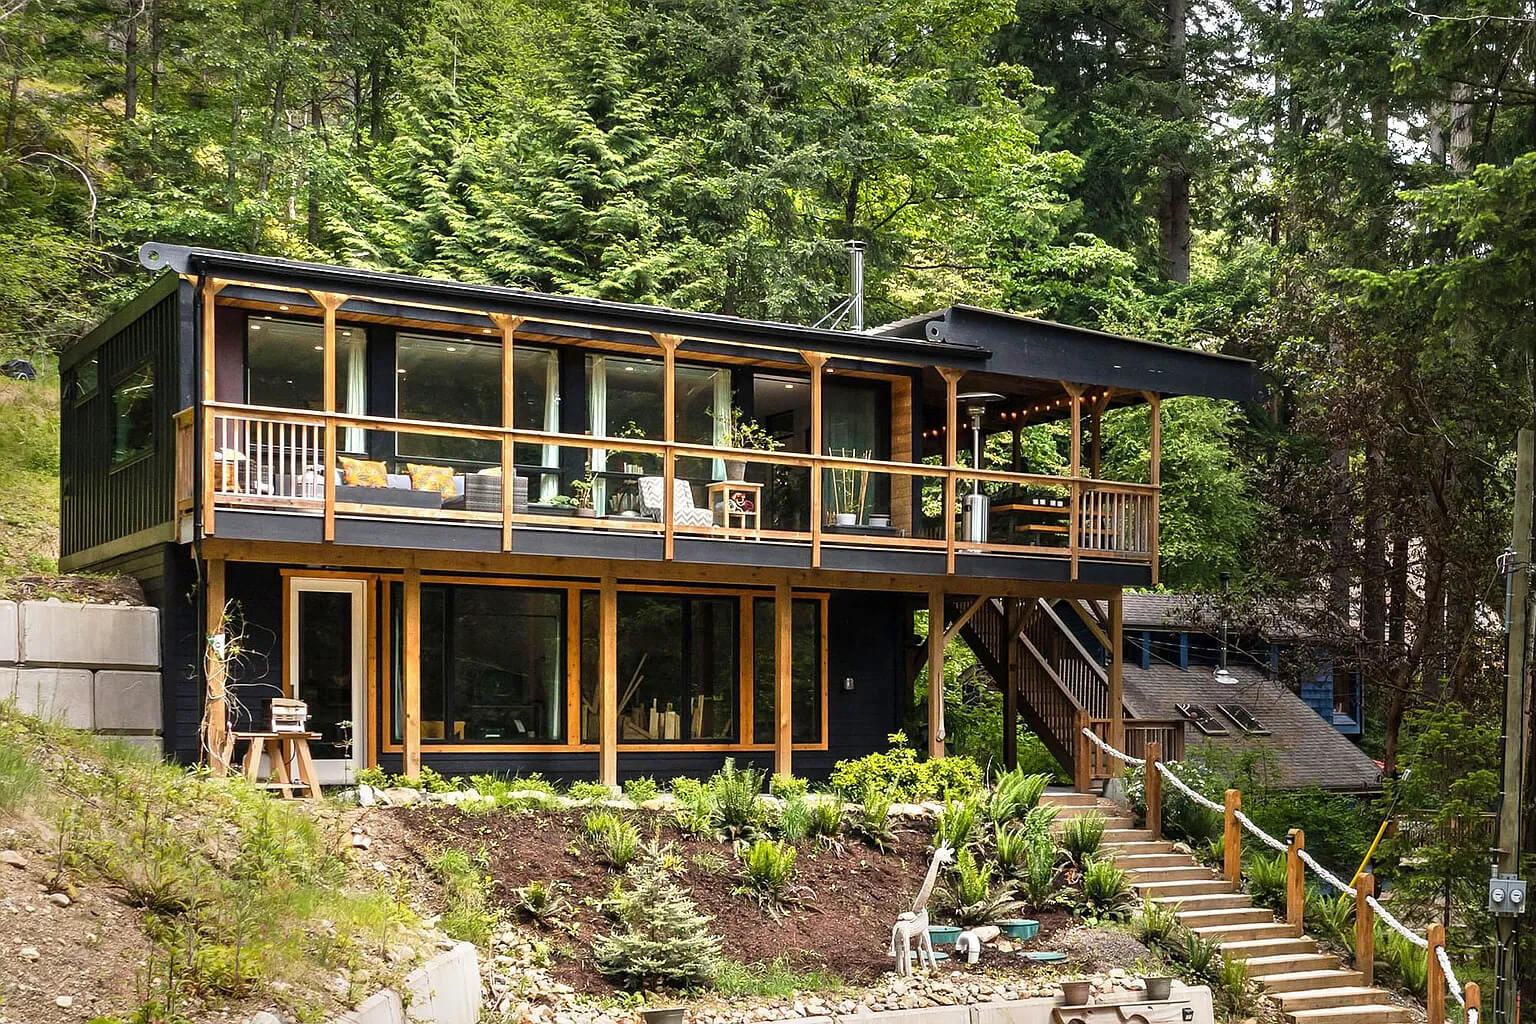 Hillside Home Projects and Their Challenges to build them